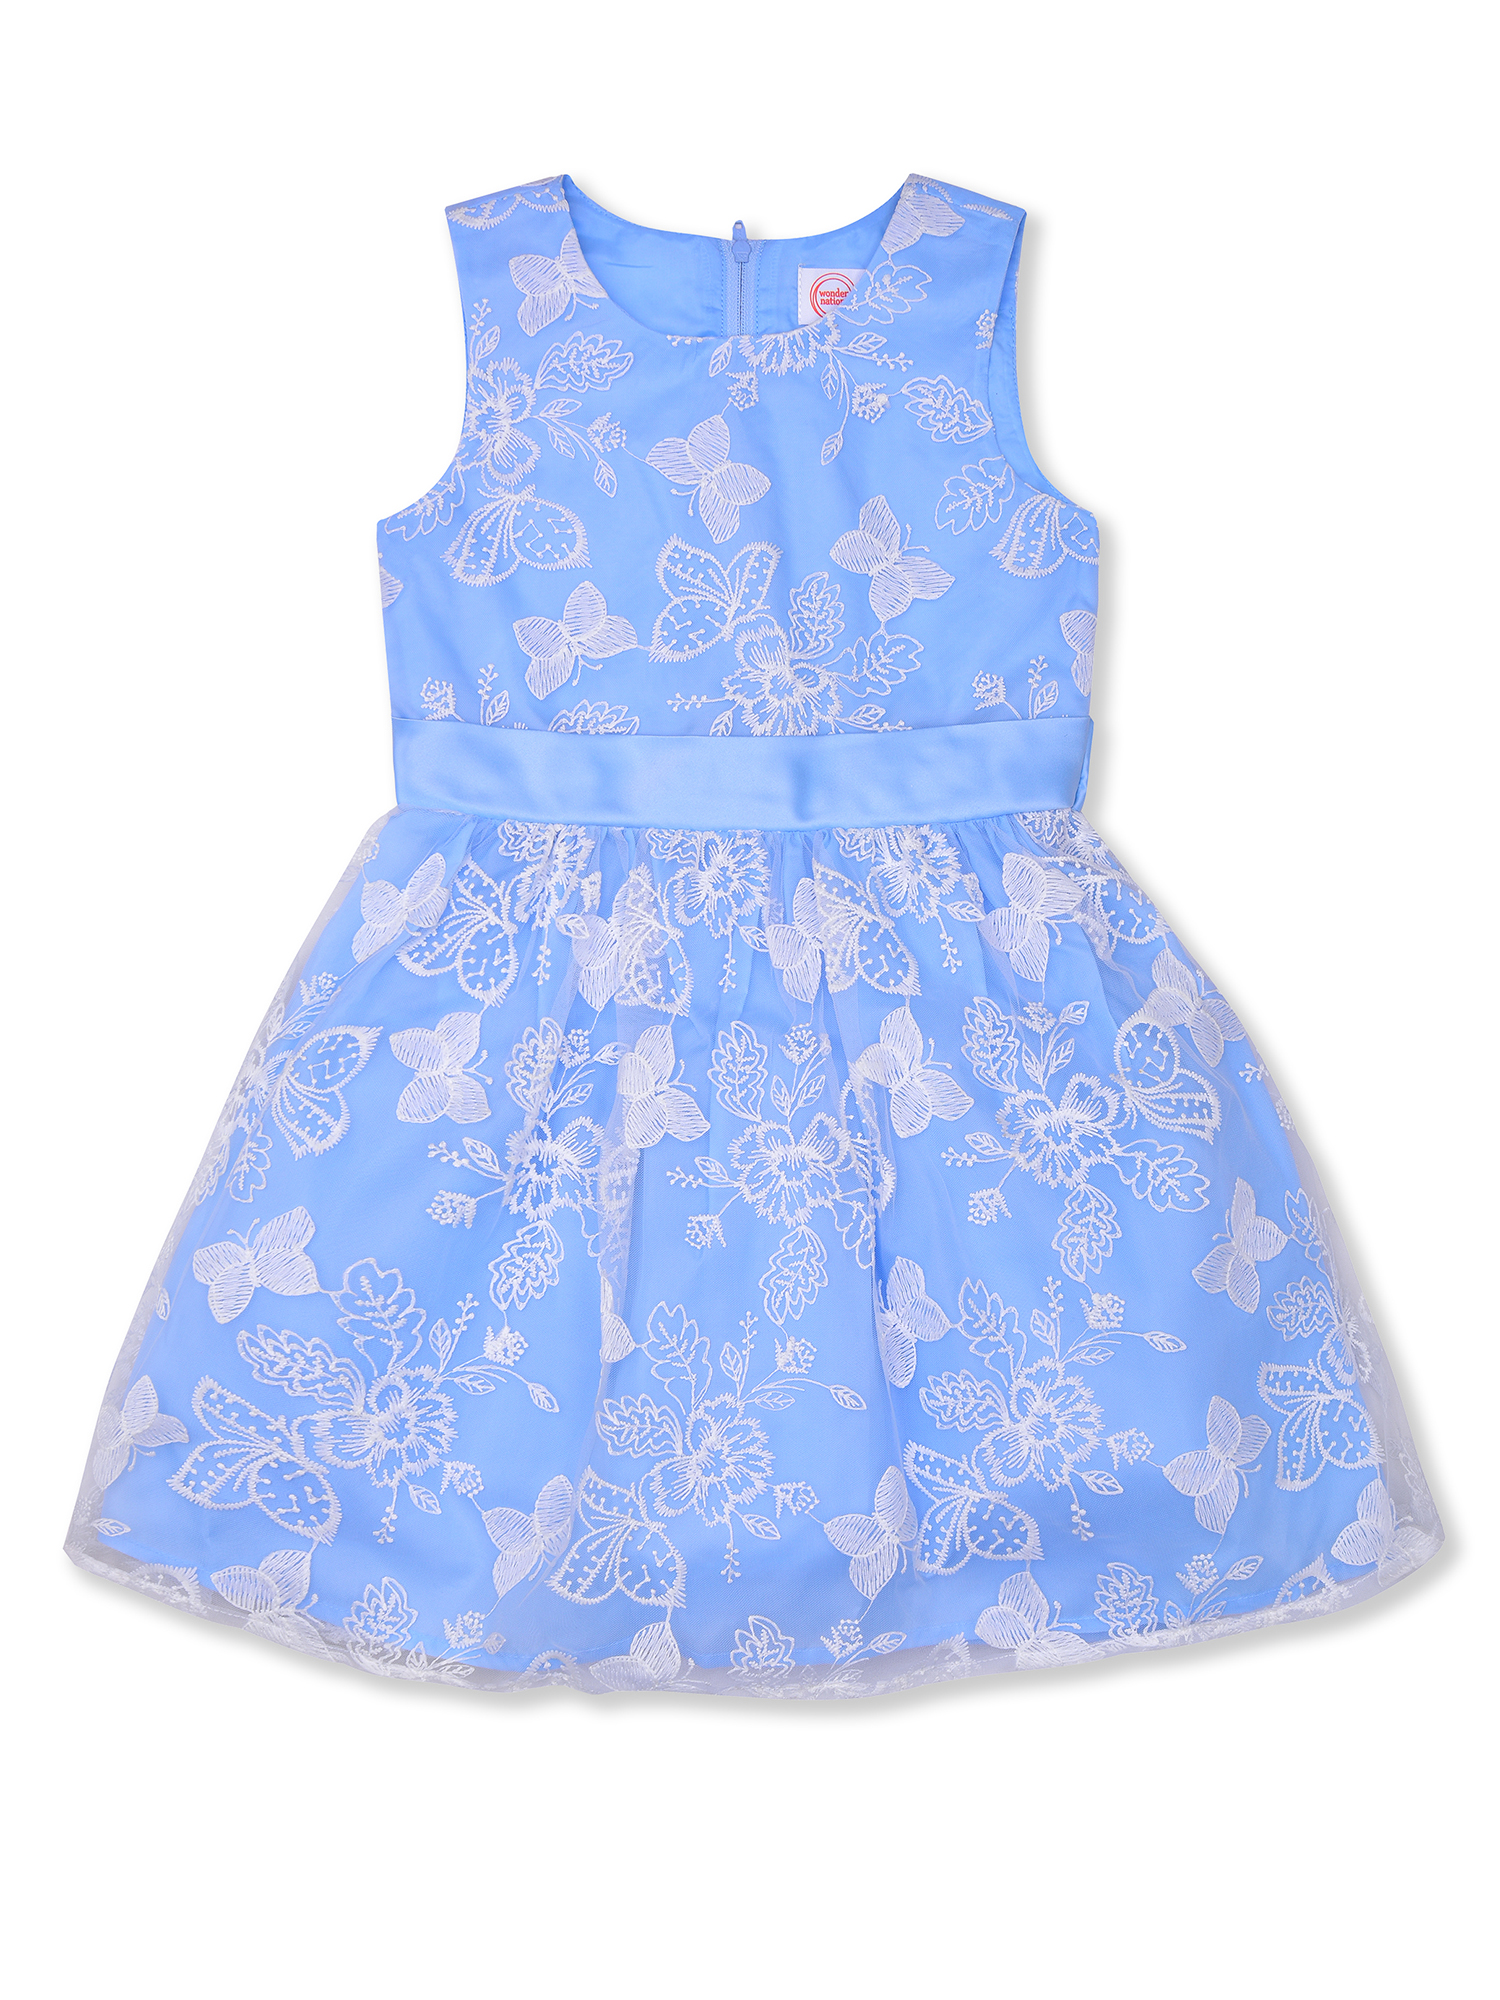 Wonder Nation Girls Butterfly Embriodery Sleeveless Dress, Sizes 4-18 & Plus - image 1 of 3